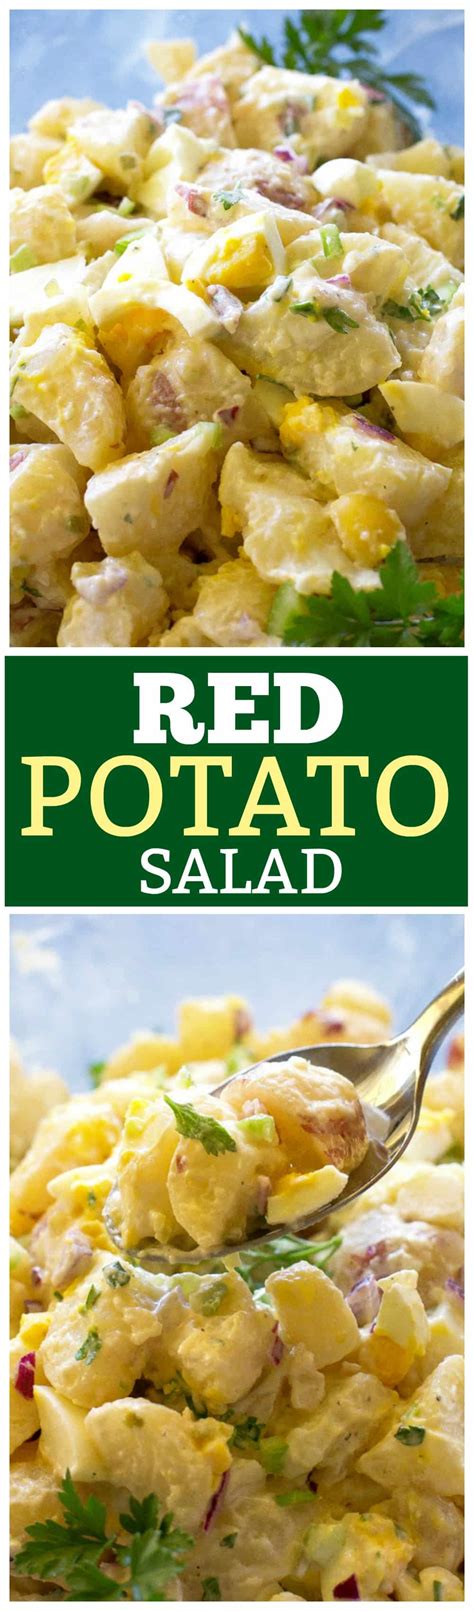 red-potato-salad-recipe-the-girl-who-ate-everything image